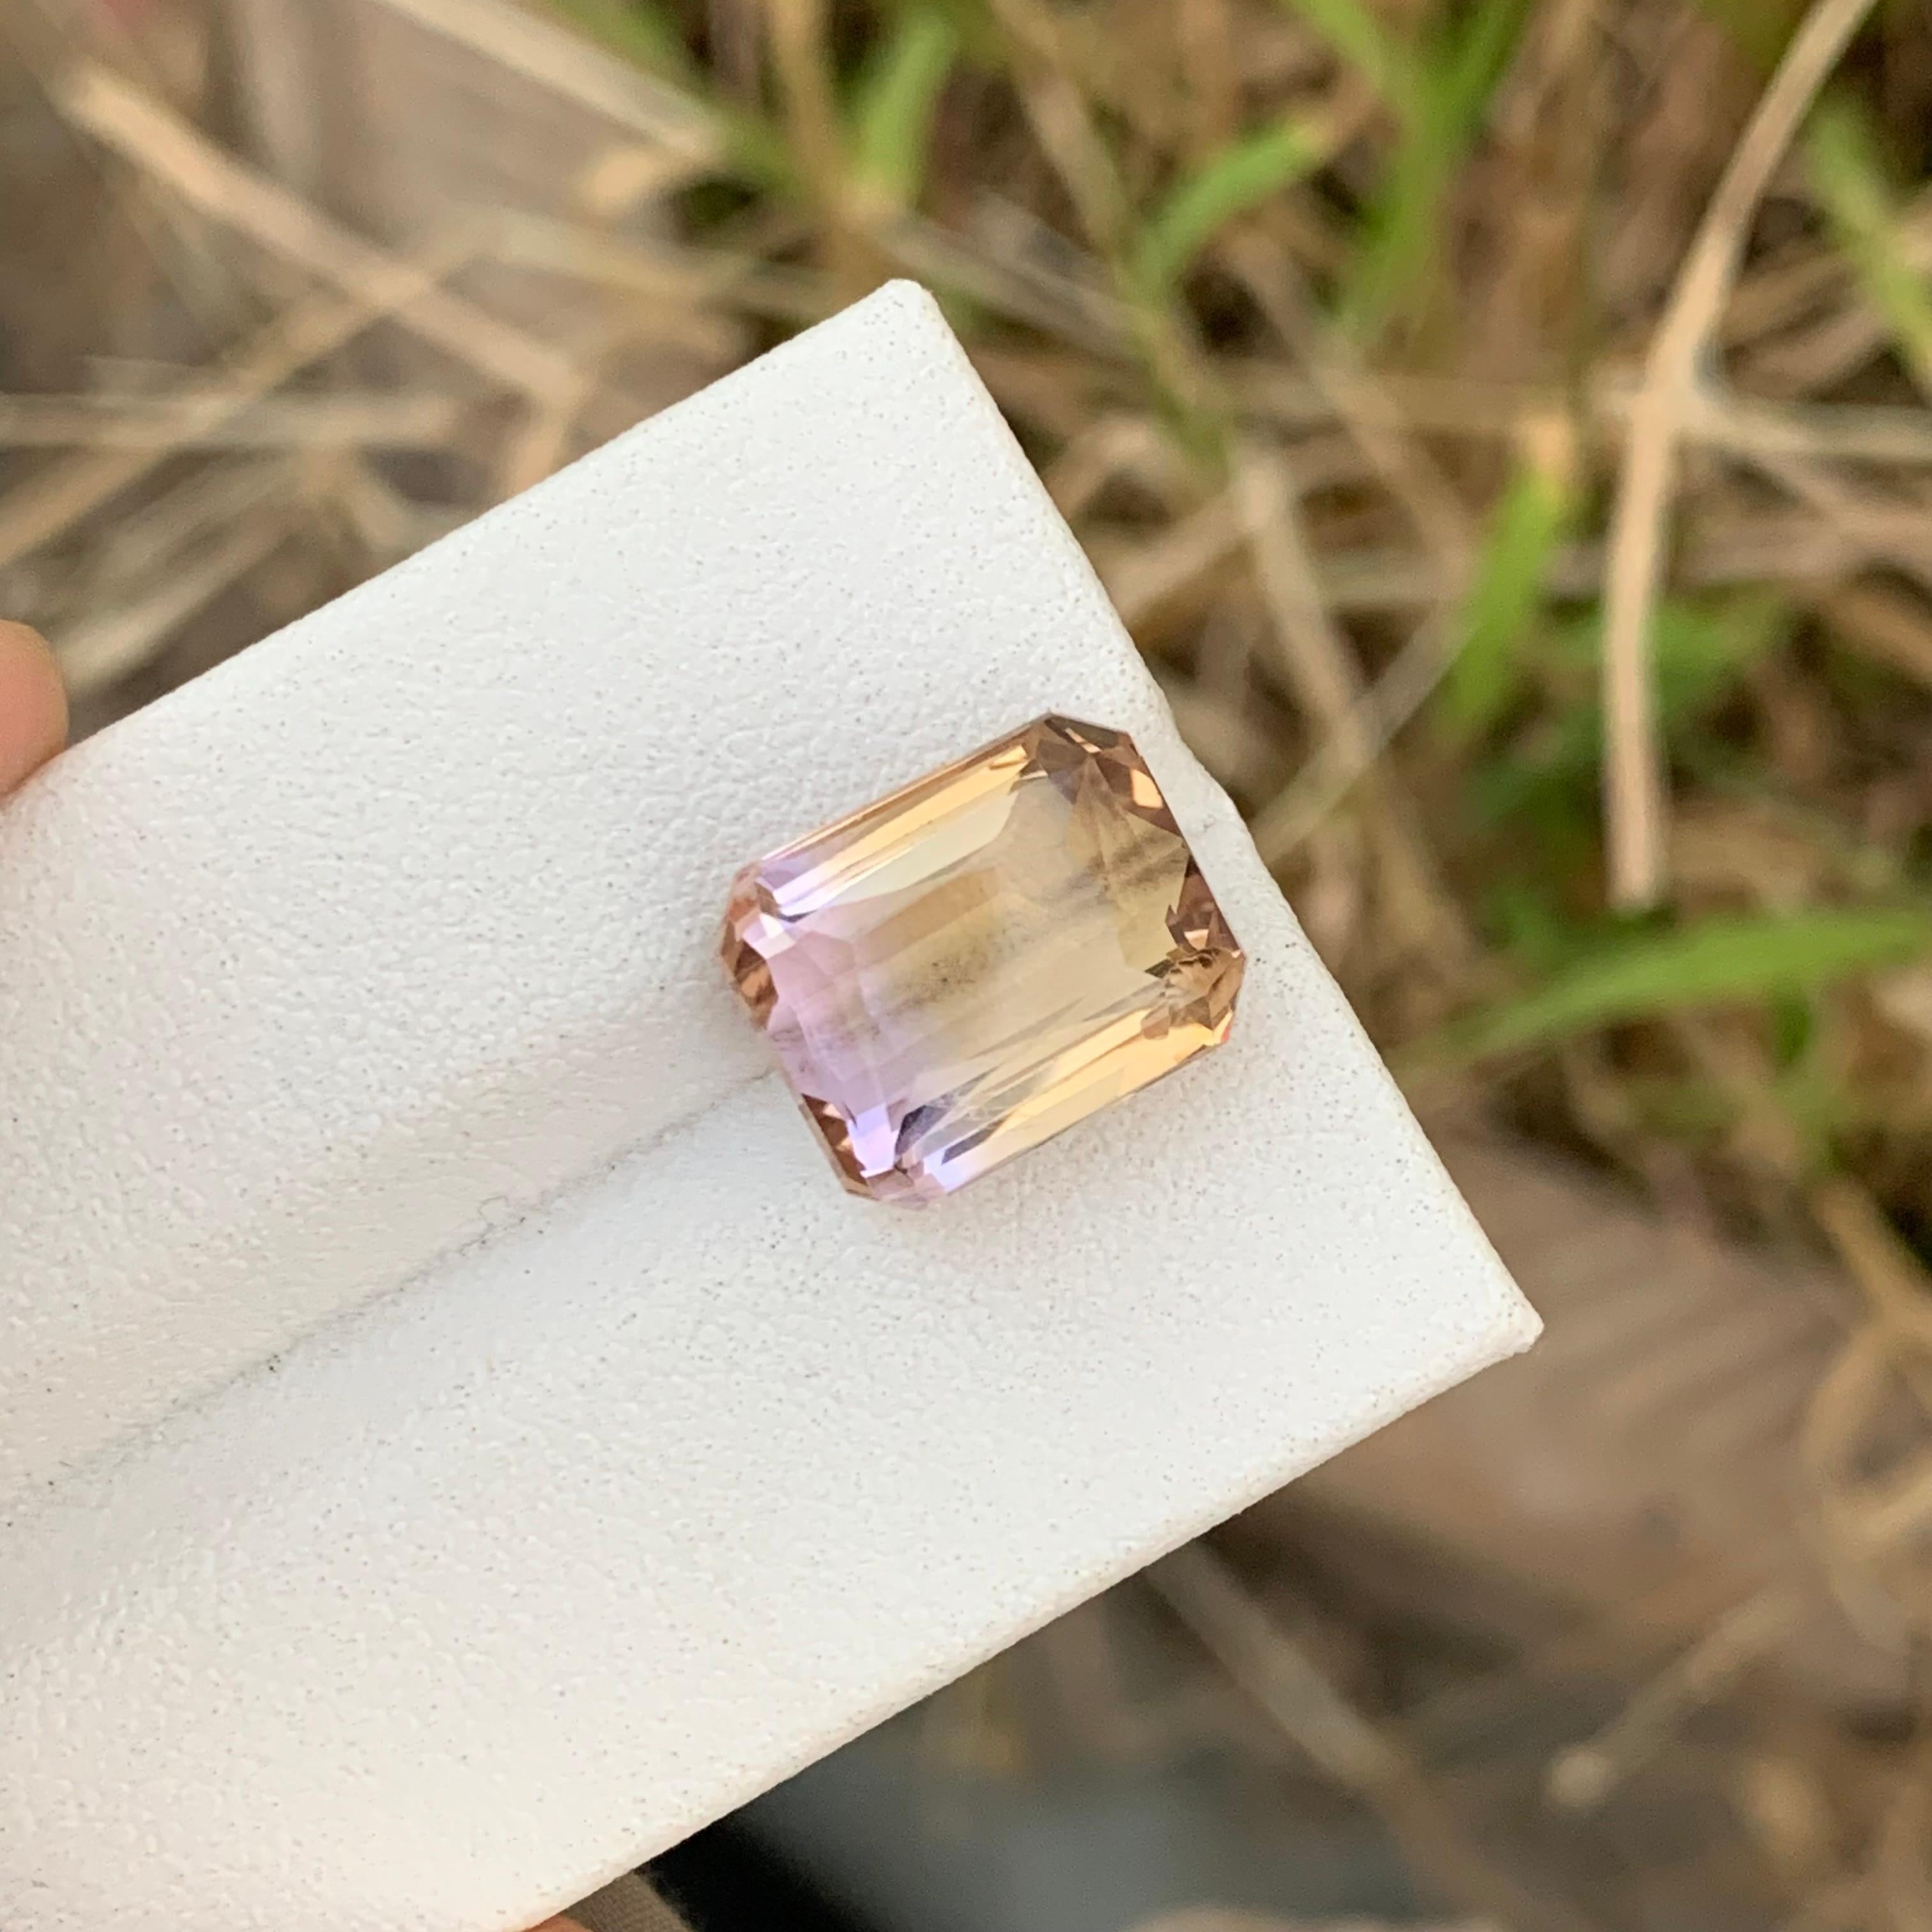 Women's or Men's 7.10 Carats Natural Loose Ametrine Emerald Shape Gem From Earth Mine  For Sale